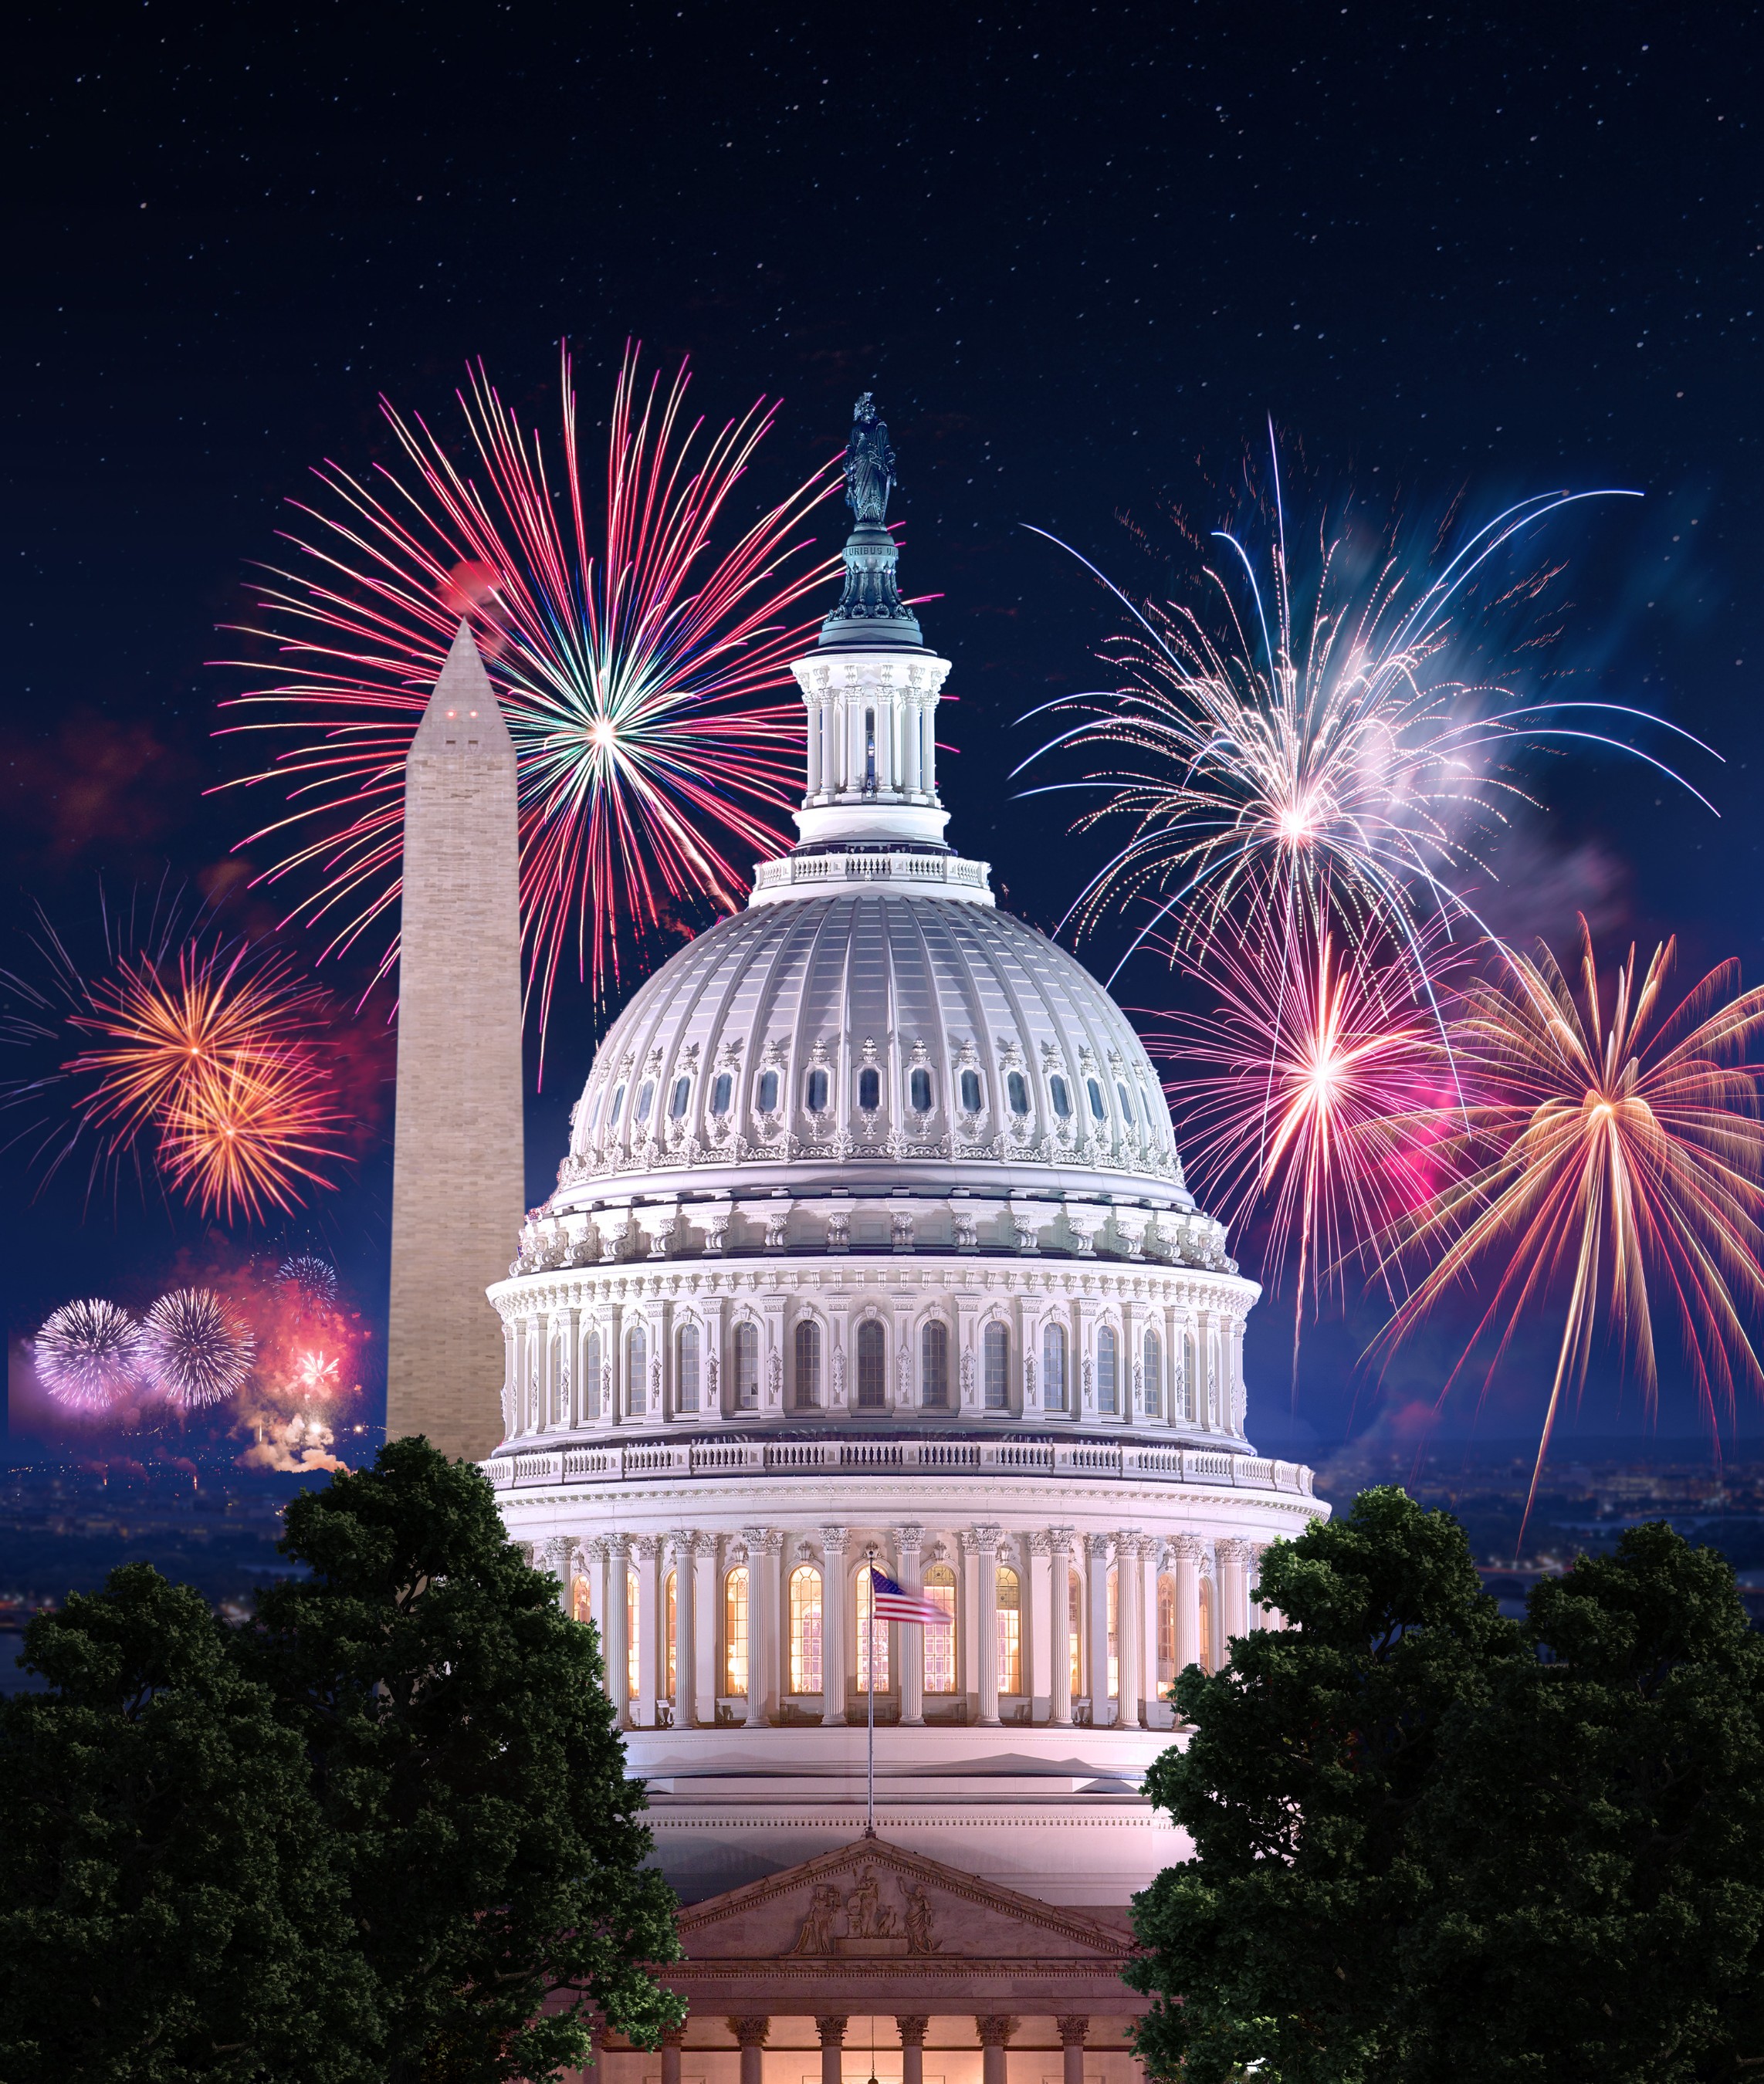 This national tradition, returning live from Washington, D.C., puts viewers front and center for America’s biggest birthday party with the greatest display of fireworks anywhere lighting up the iconic D.C. skyline.